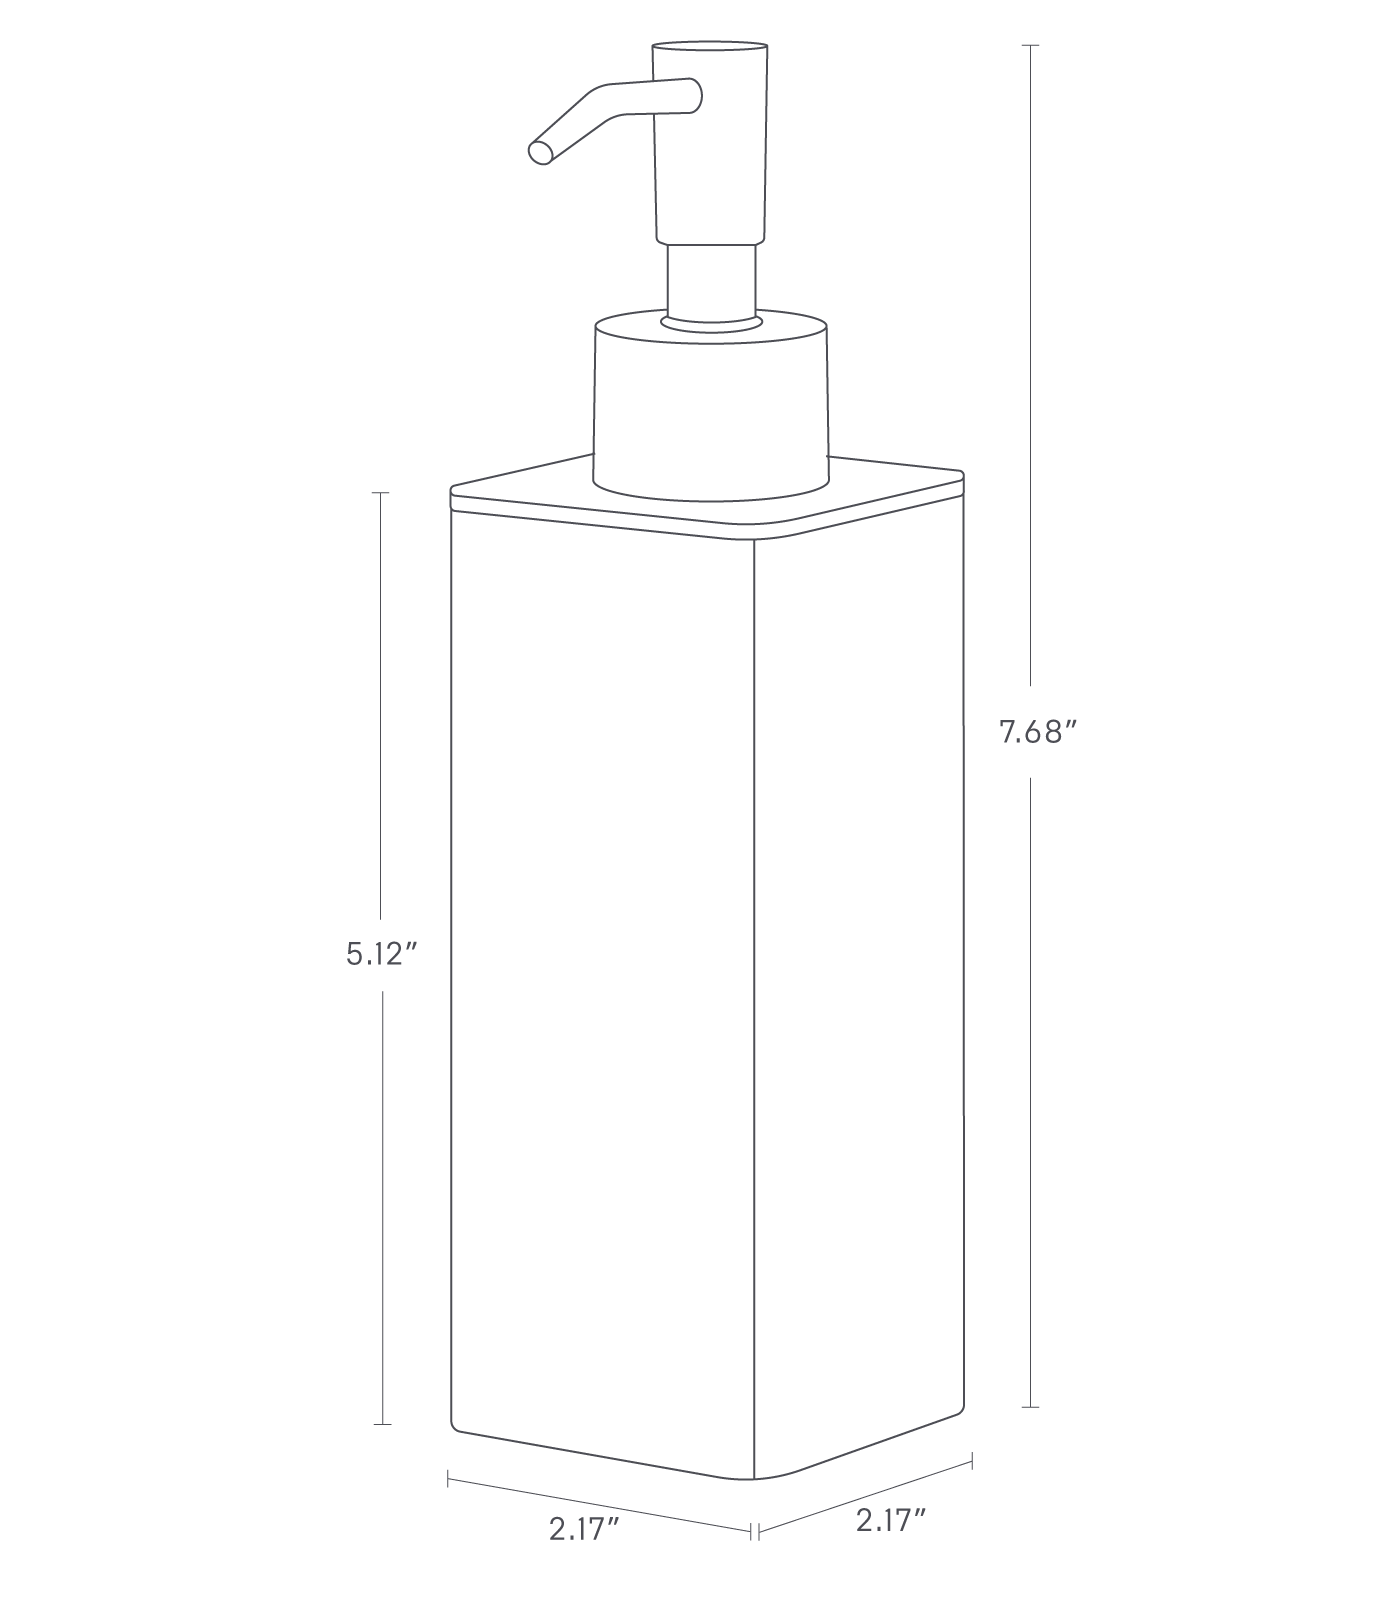 Dimension image for Traceless Adhesive Soap Dispenser showing a total height of 7.68